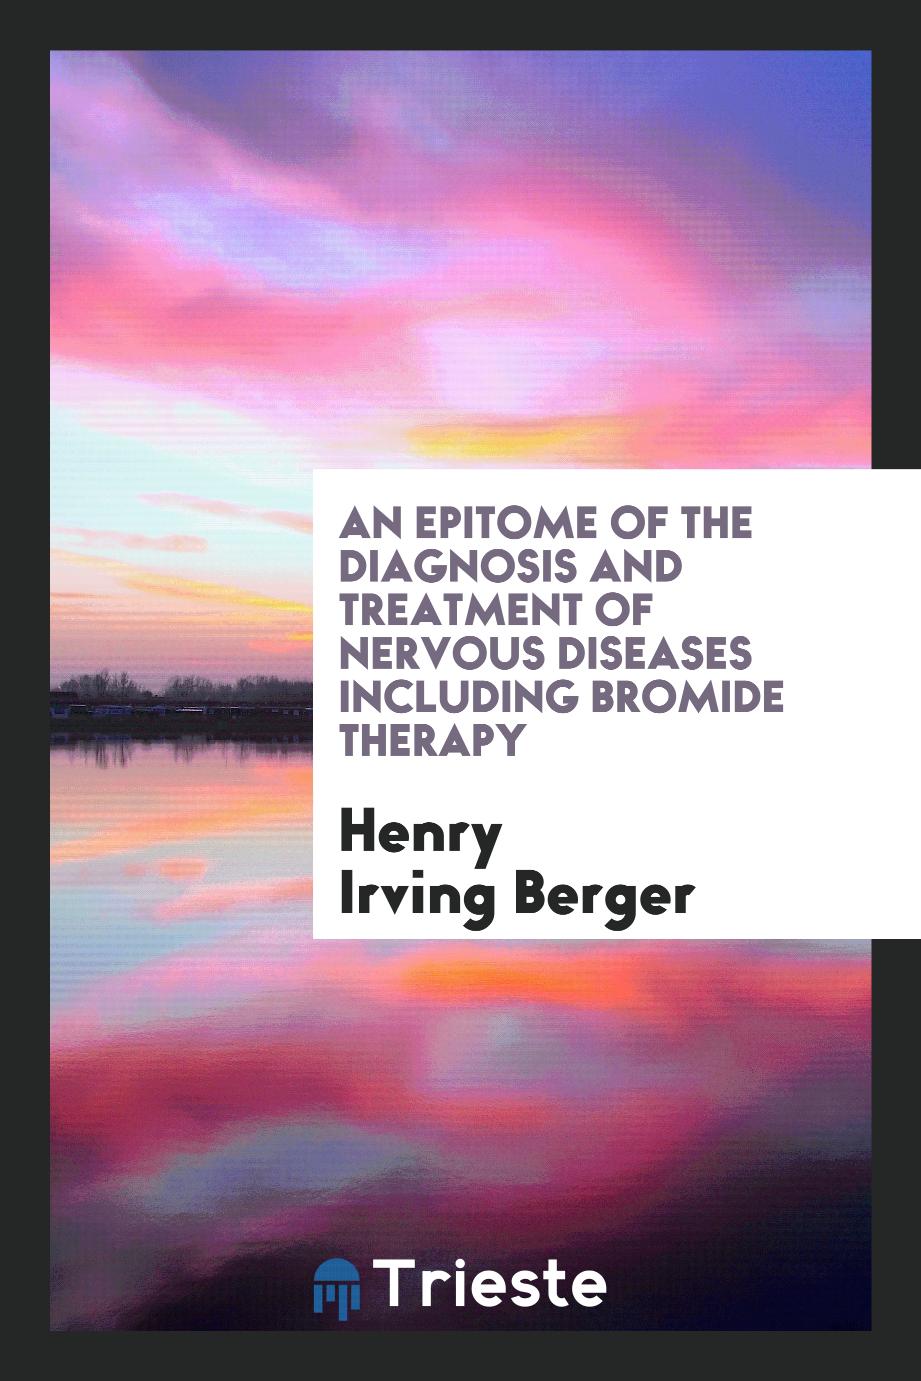 An Epitome of the diagnosis and treatment of nervous diseases including bromide therapy